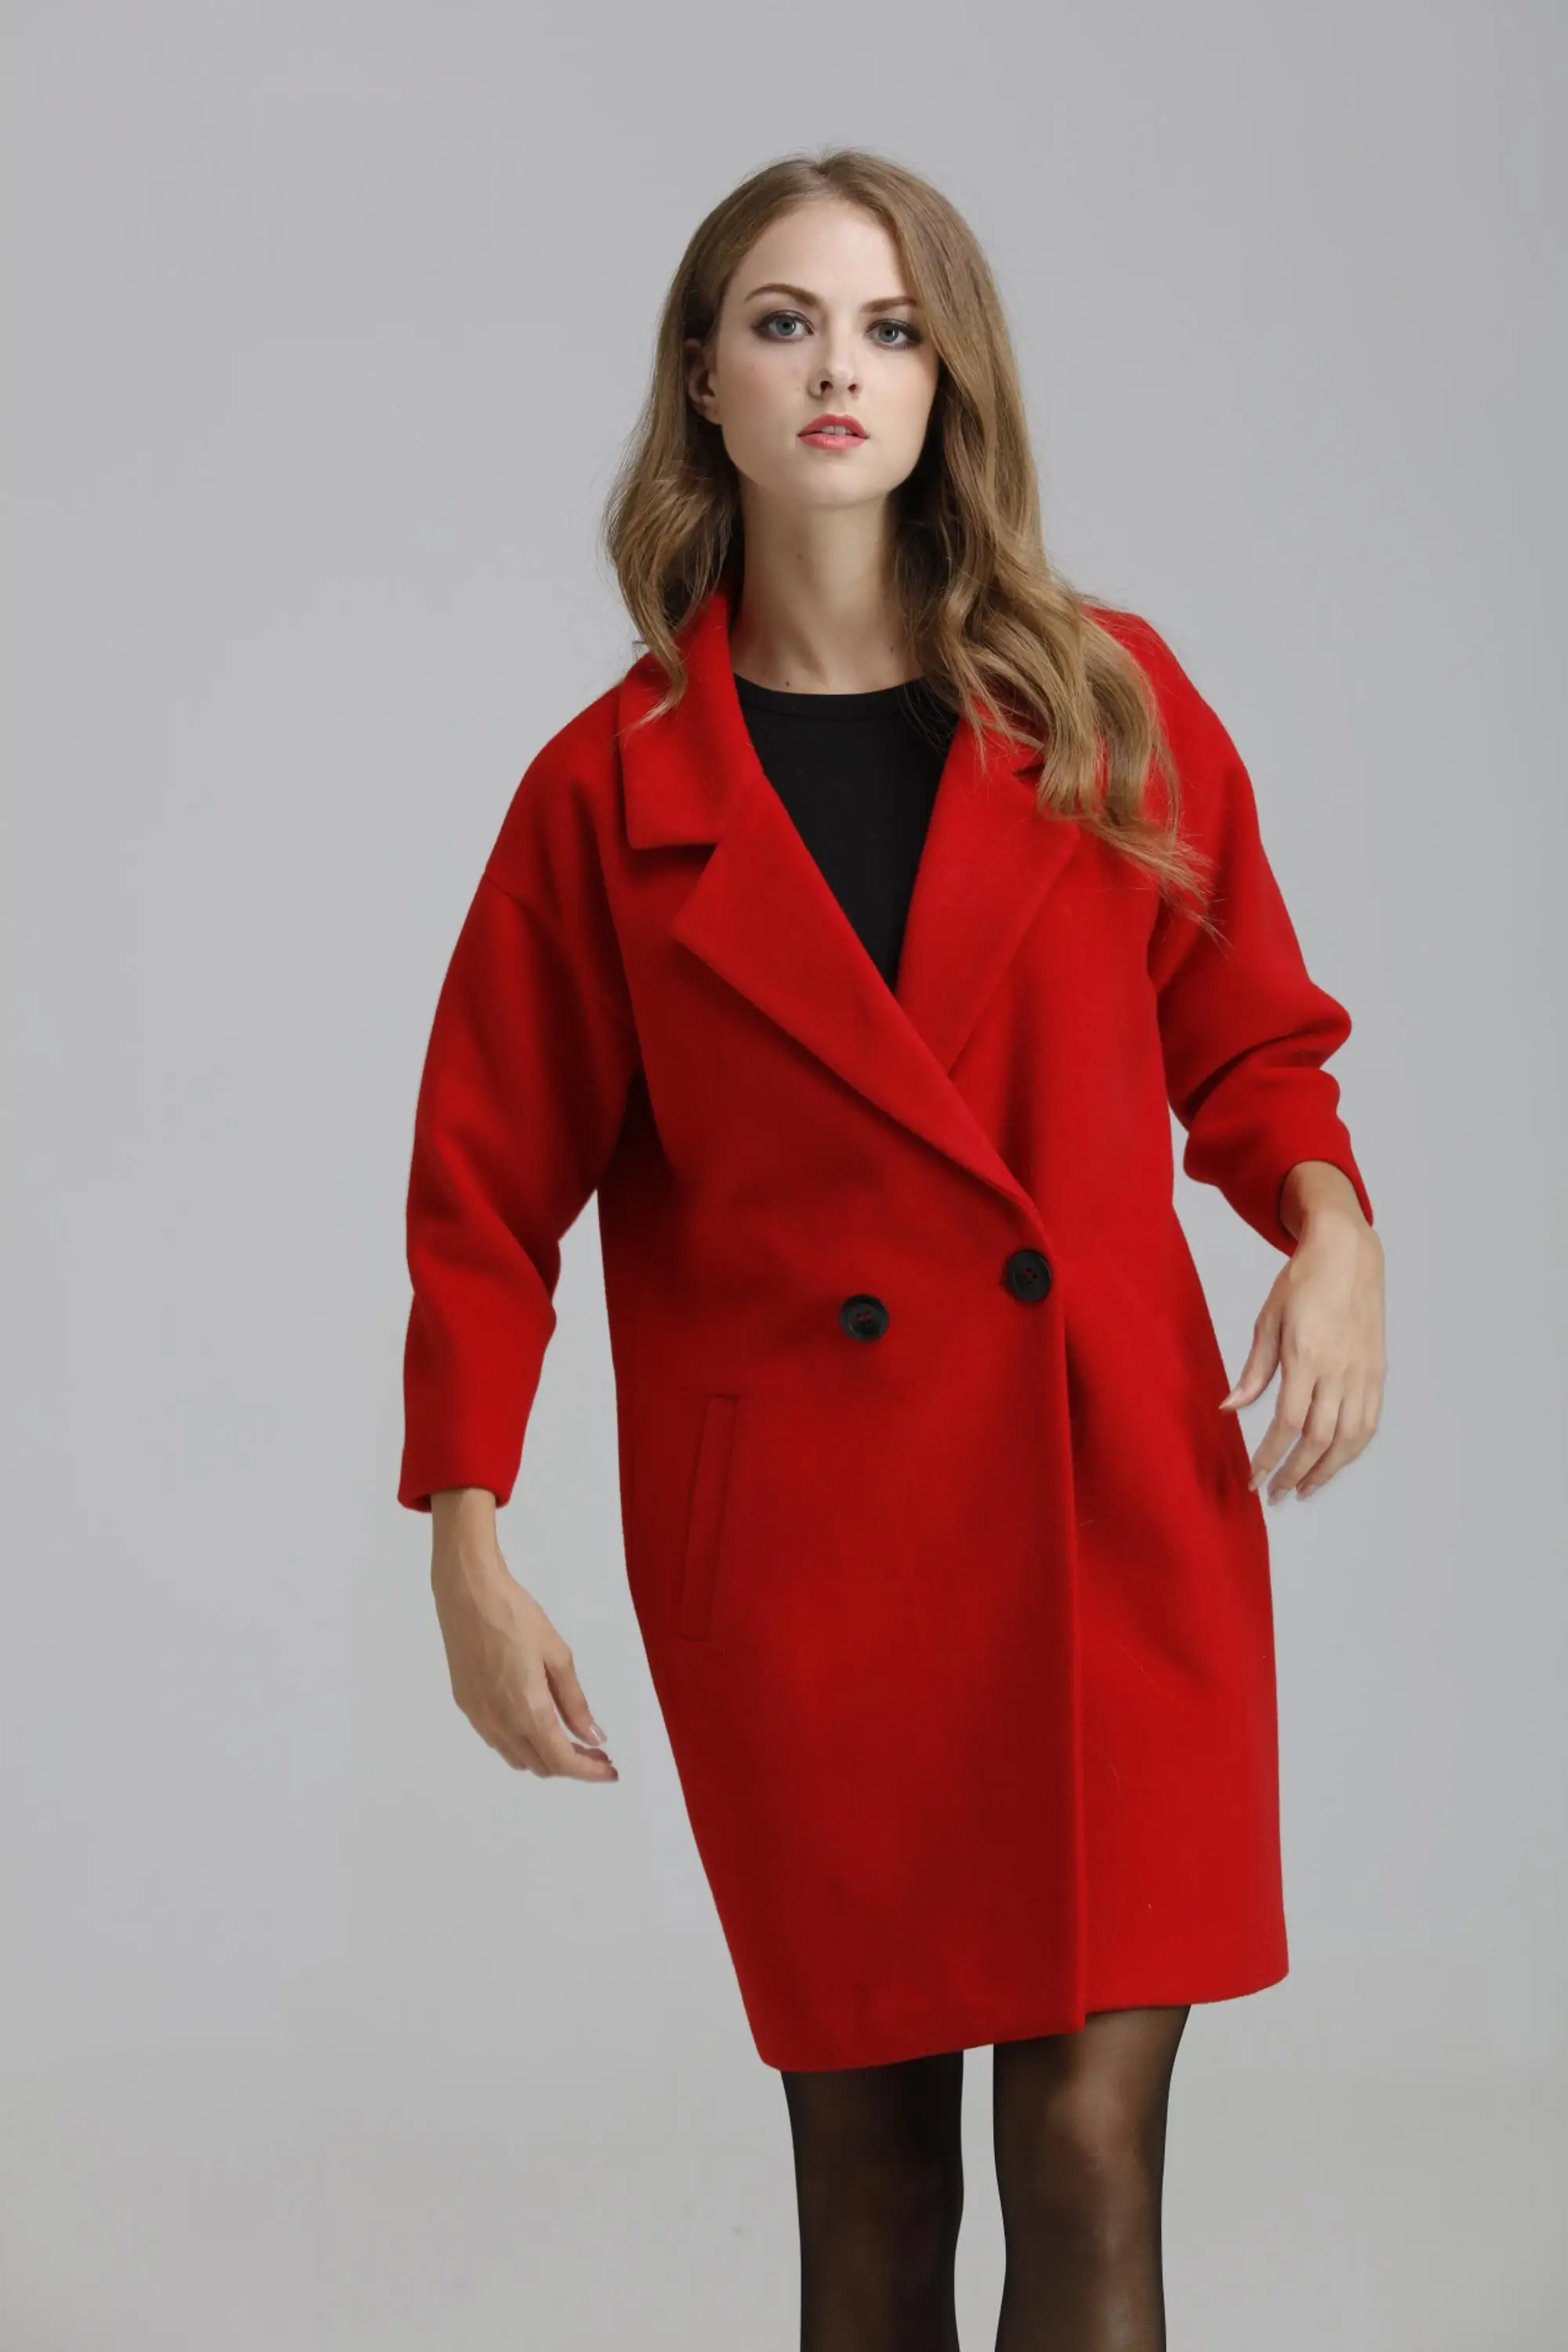 2020 Latest Chinese Style Women Red Wool Coat Casual Winter Wholesale ...